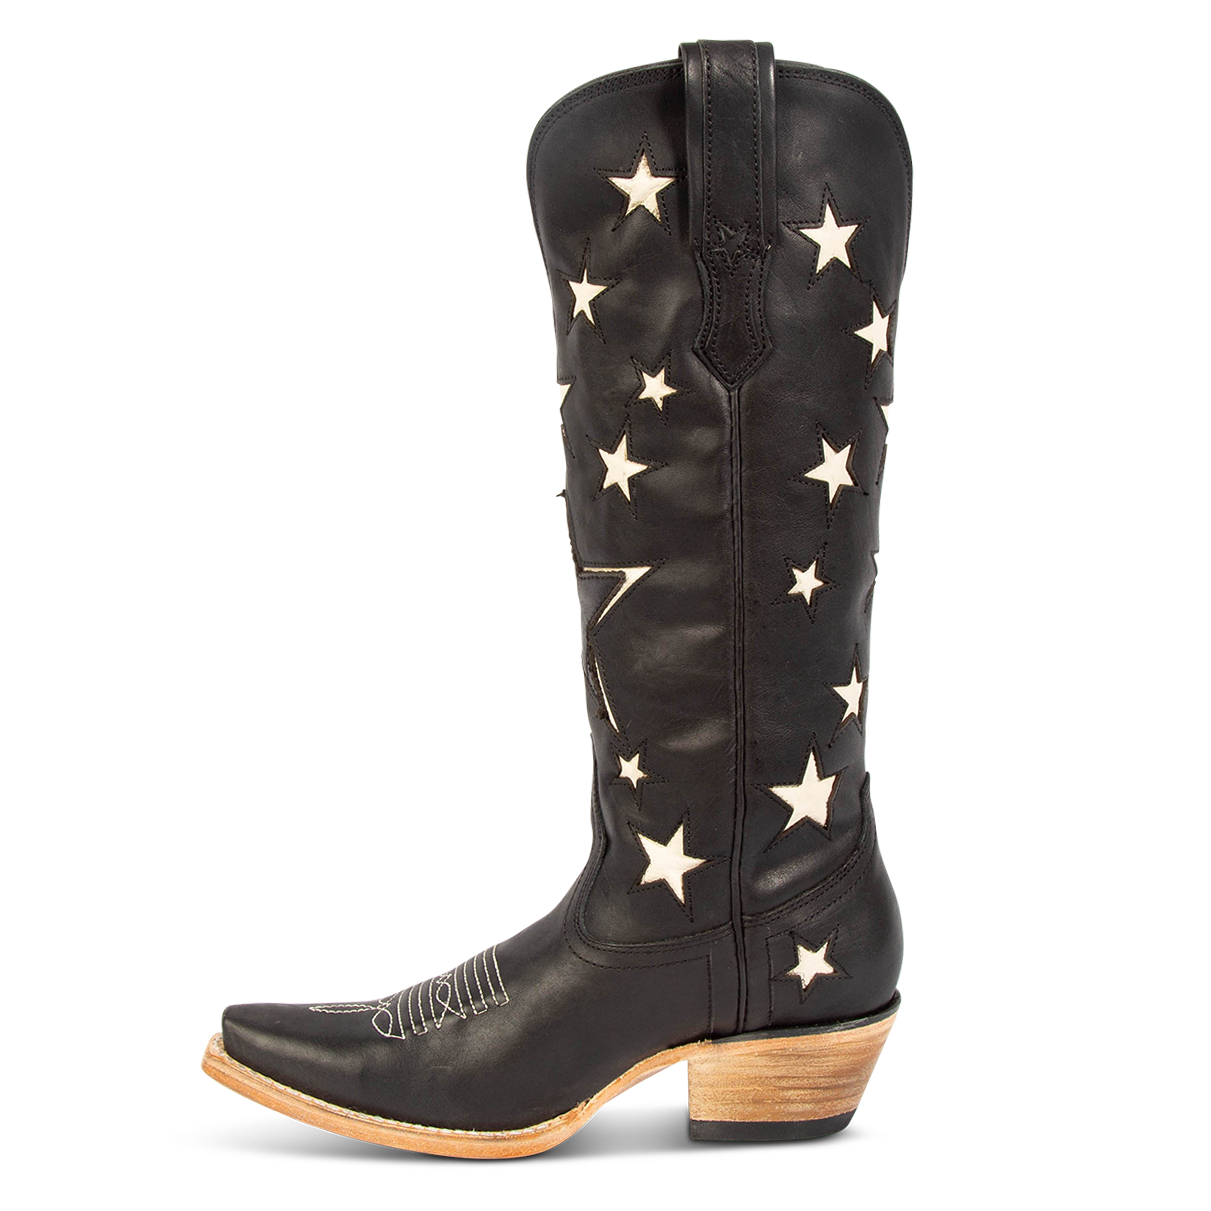 Side view showing two-toned leather and exterior pull strap on FREEBIRD women's Starzz black multi western boot